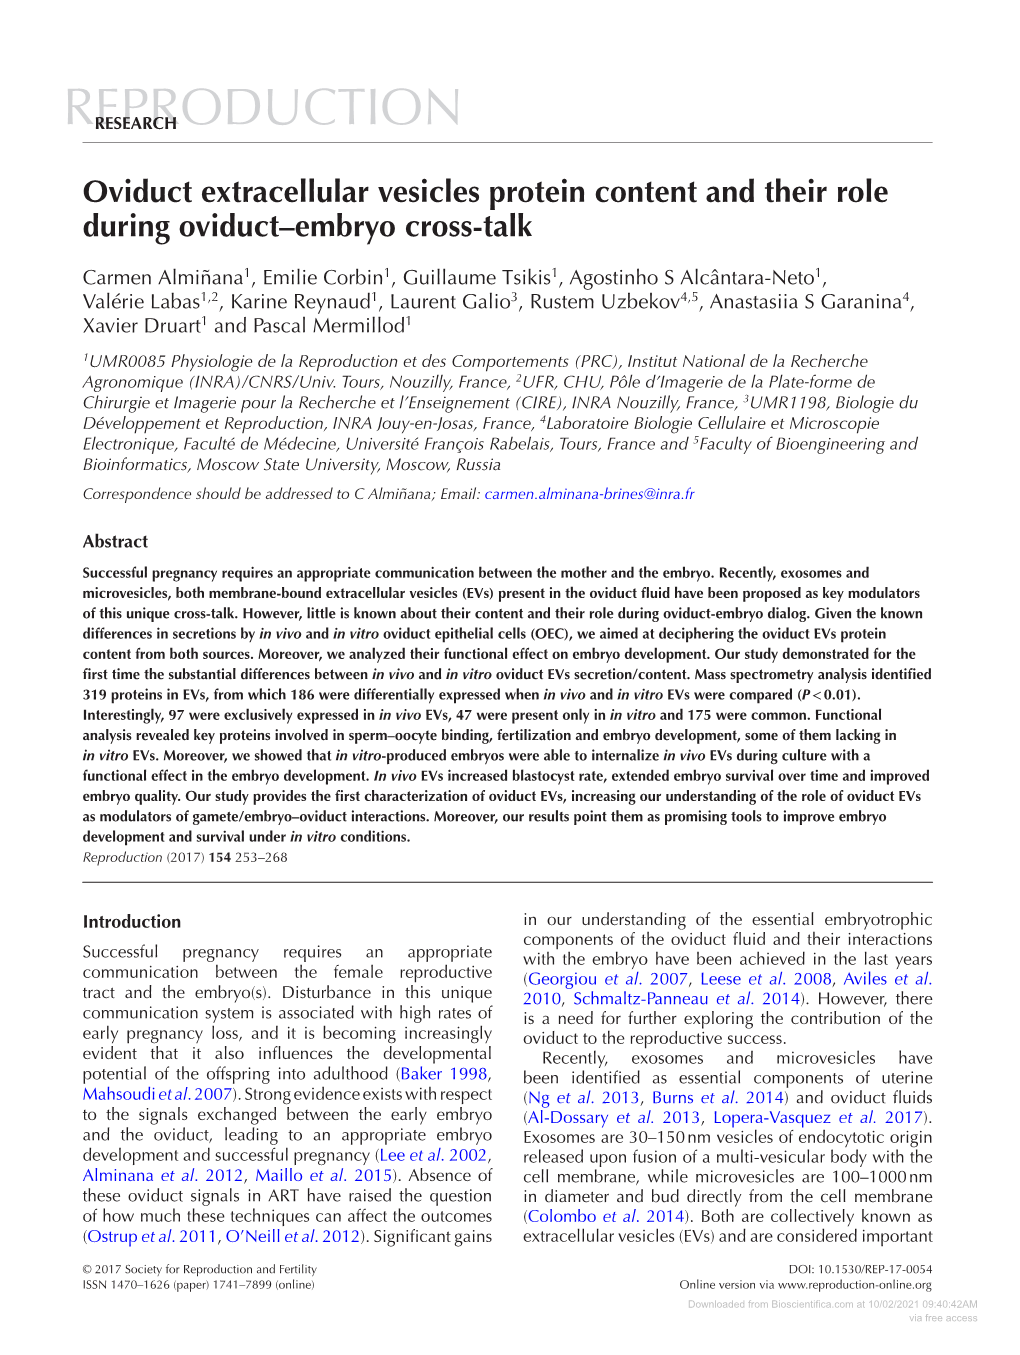 Oviduct Extracellular Vesicles Protein Content and Their Role During Oviduct–Embryo Cross-Talk